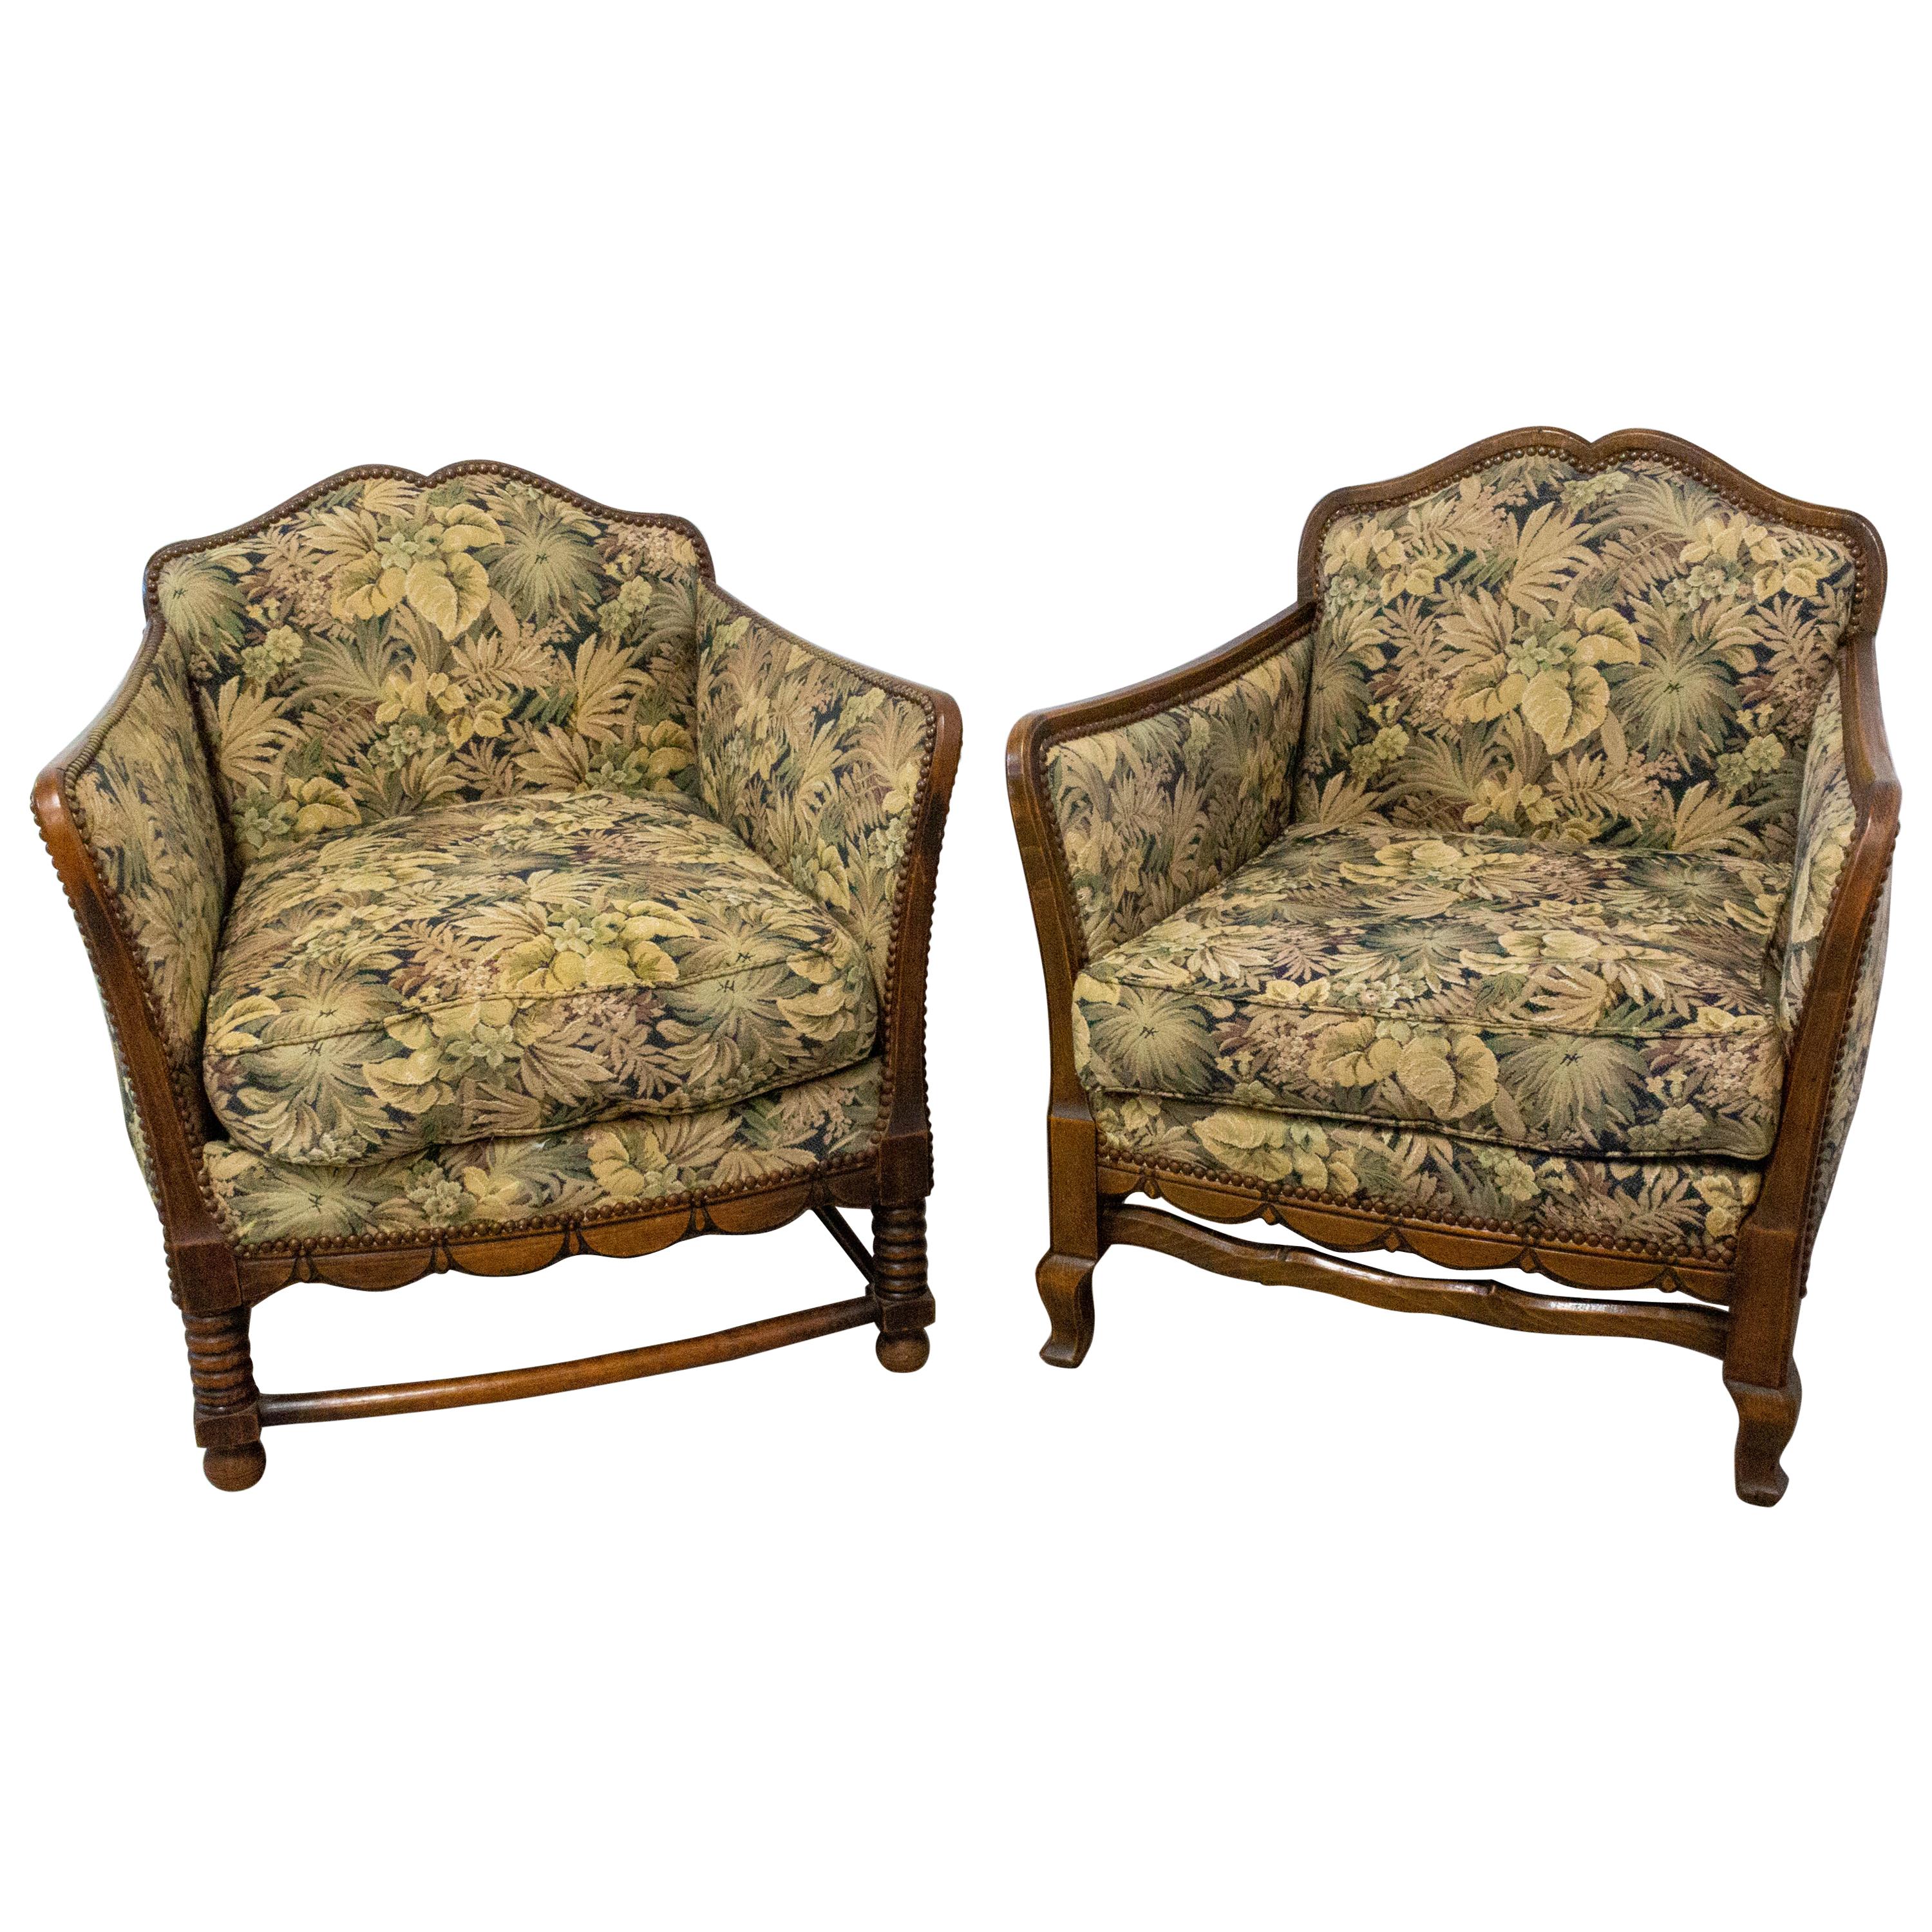 Pair of Beech Armchairs French, to Be Re-Upholstered Early 20th Century For Sale